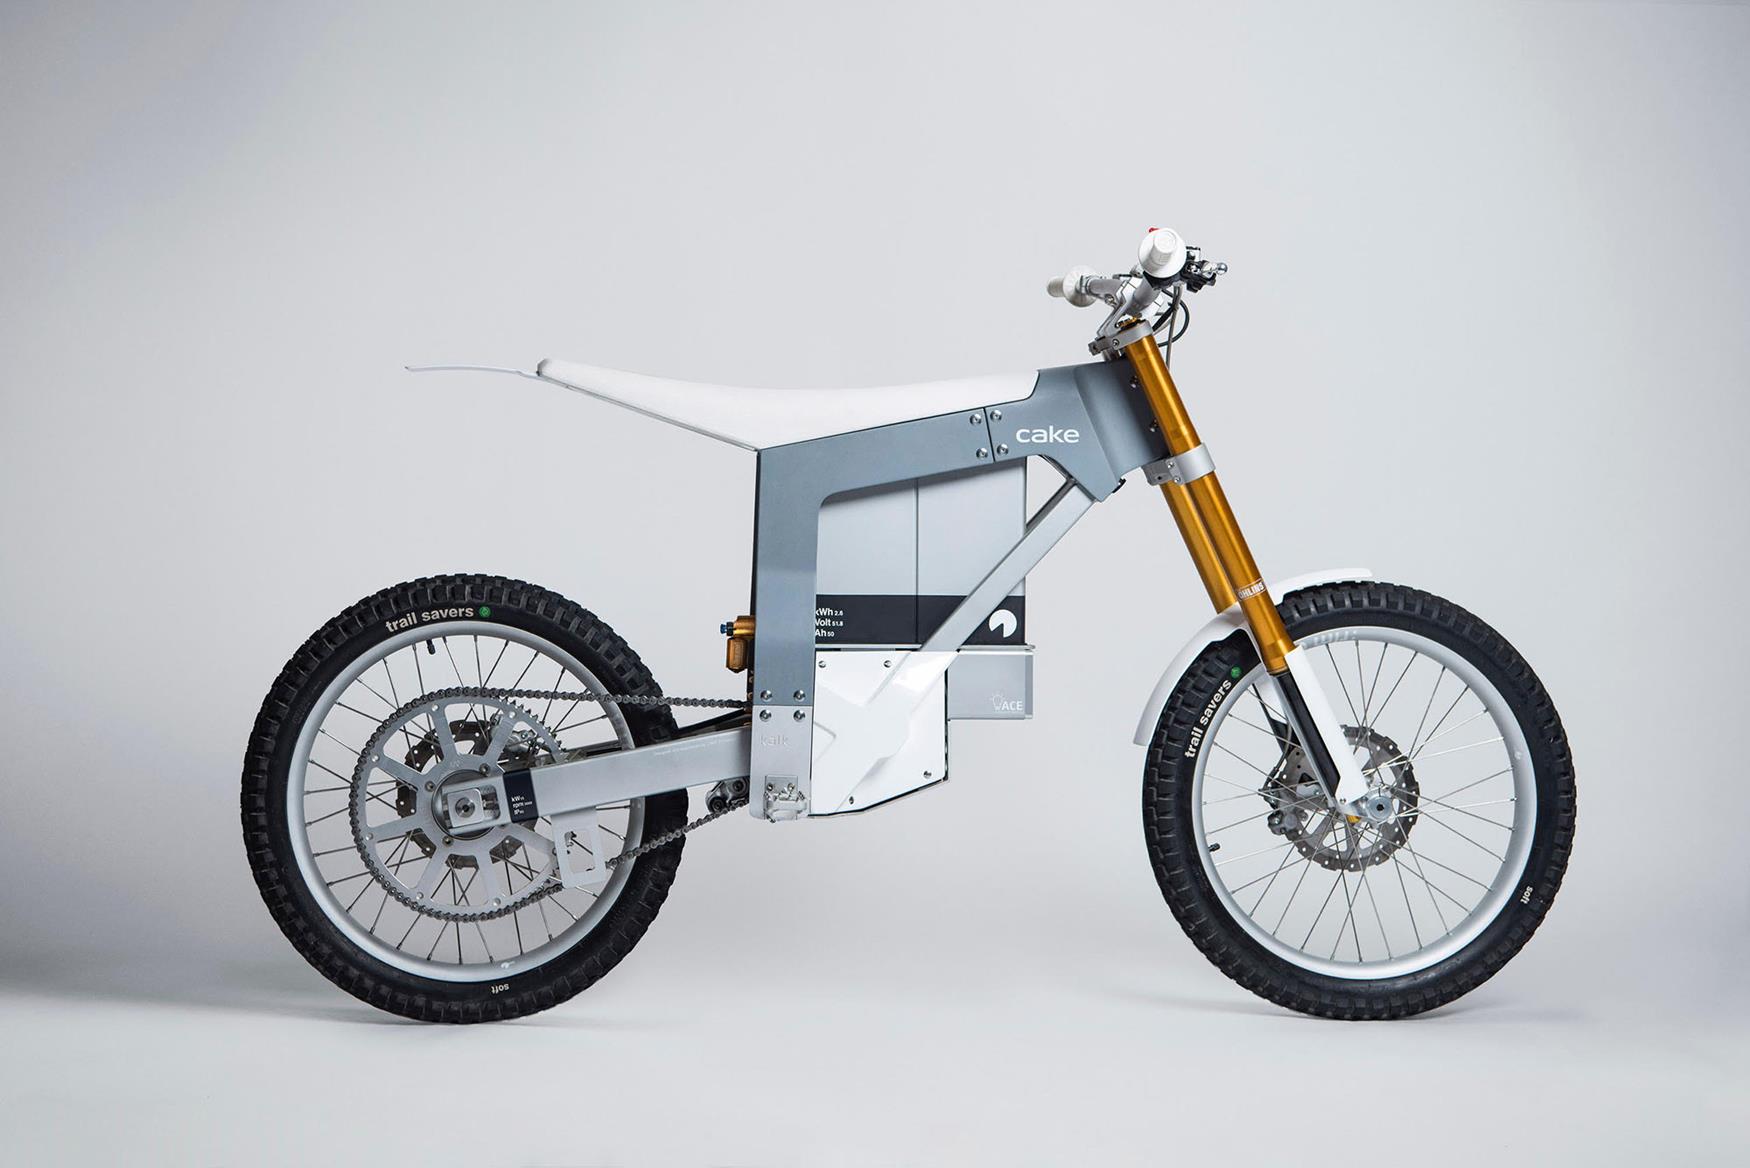 The Perfect Motorcycle For New Riders Comes From Sweden